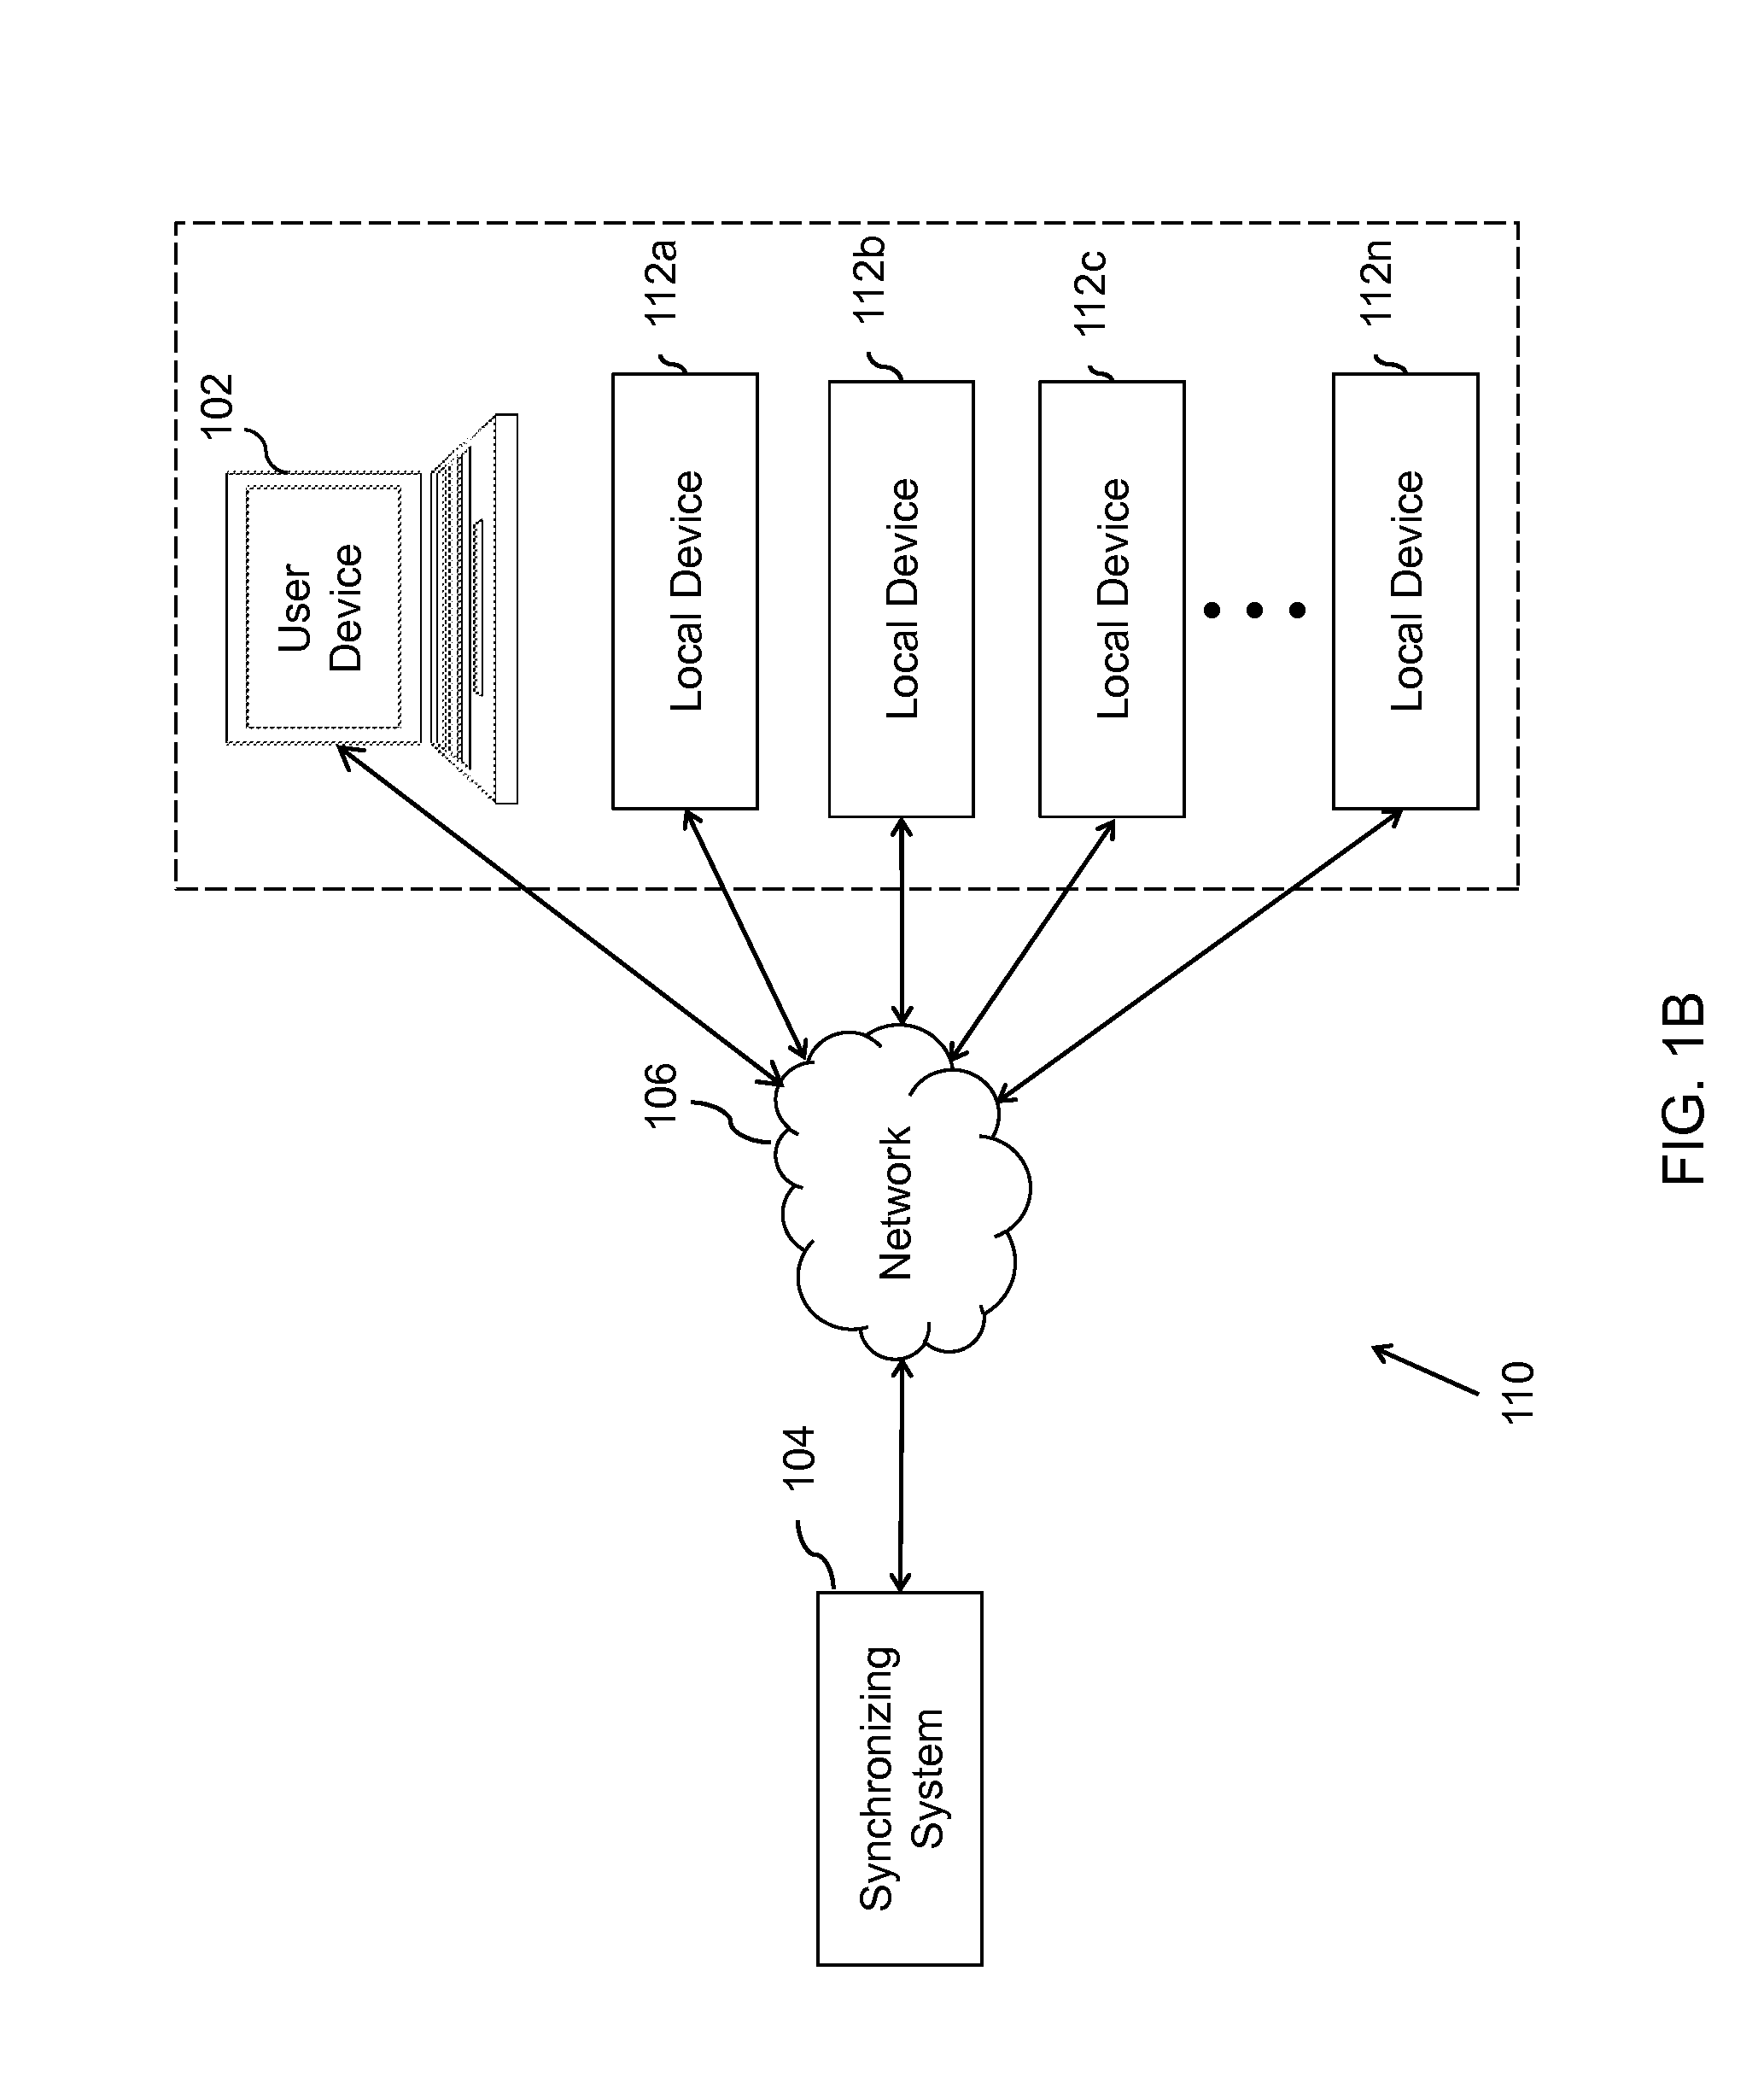 Systems and methods to duplicate audio and visual views in a conferencing system